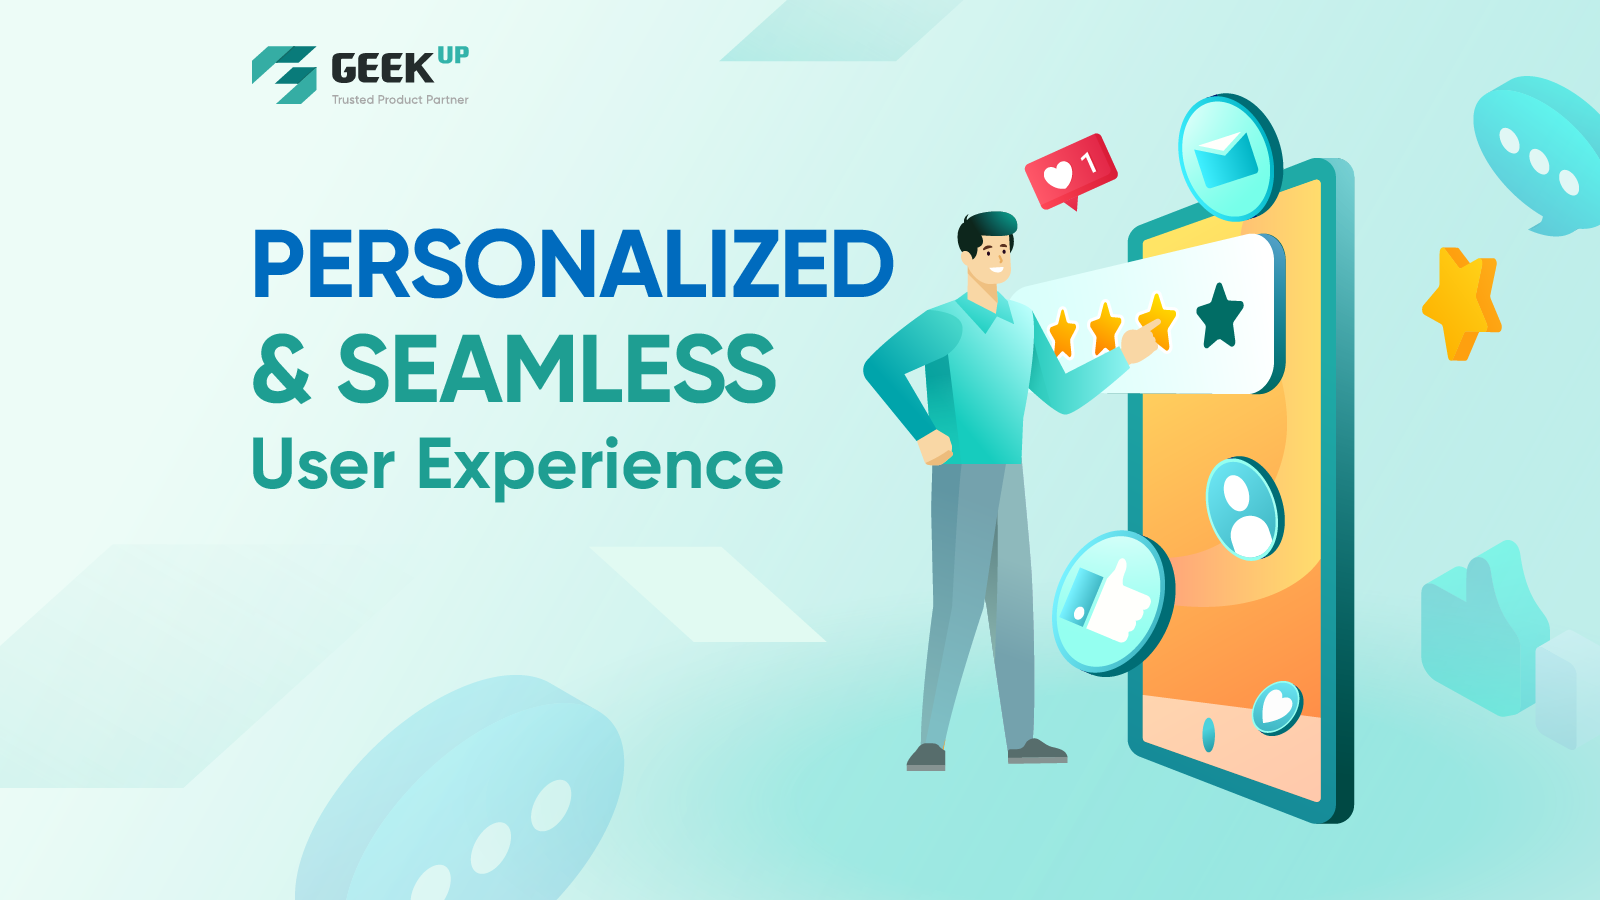 Seamless & personalized customer experience: There is no room for slow-moving businesses